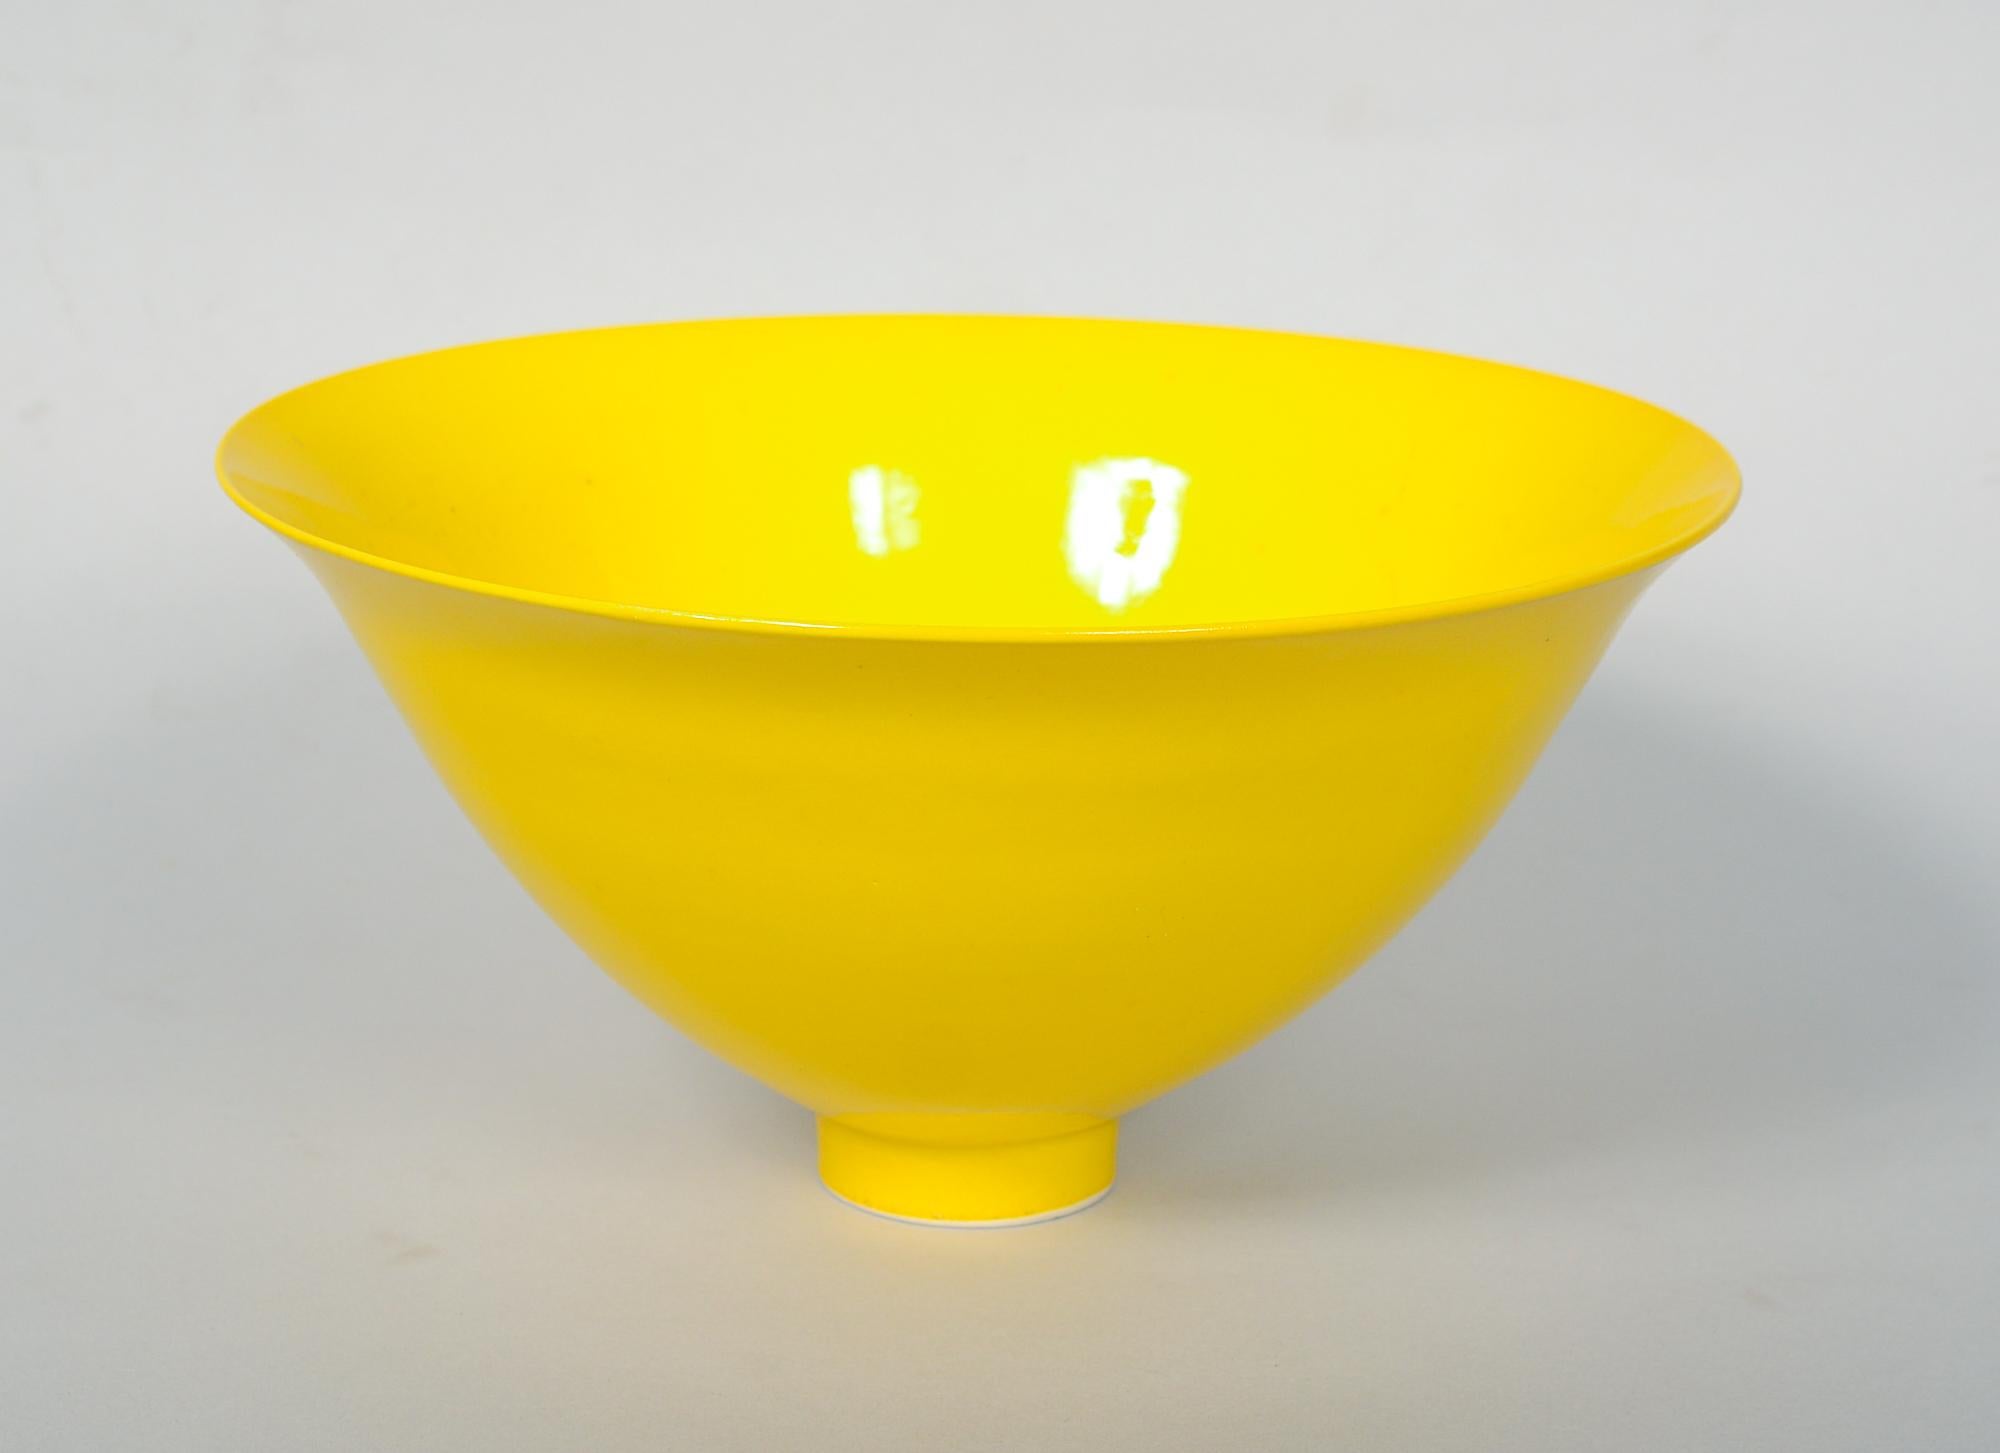 Porcelain bowl by James Lovera. This delicate thin walled bowl sits on a small foot and has a flaring rim. The bright yellow glaze suits the form perfectly. There is a glaze skip in the interior.

James Lovera (1920-2015) was born in Hayward,